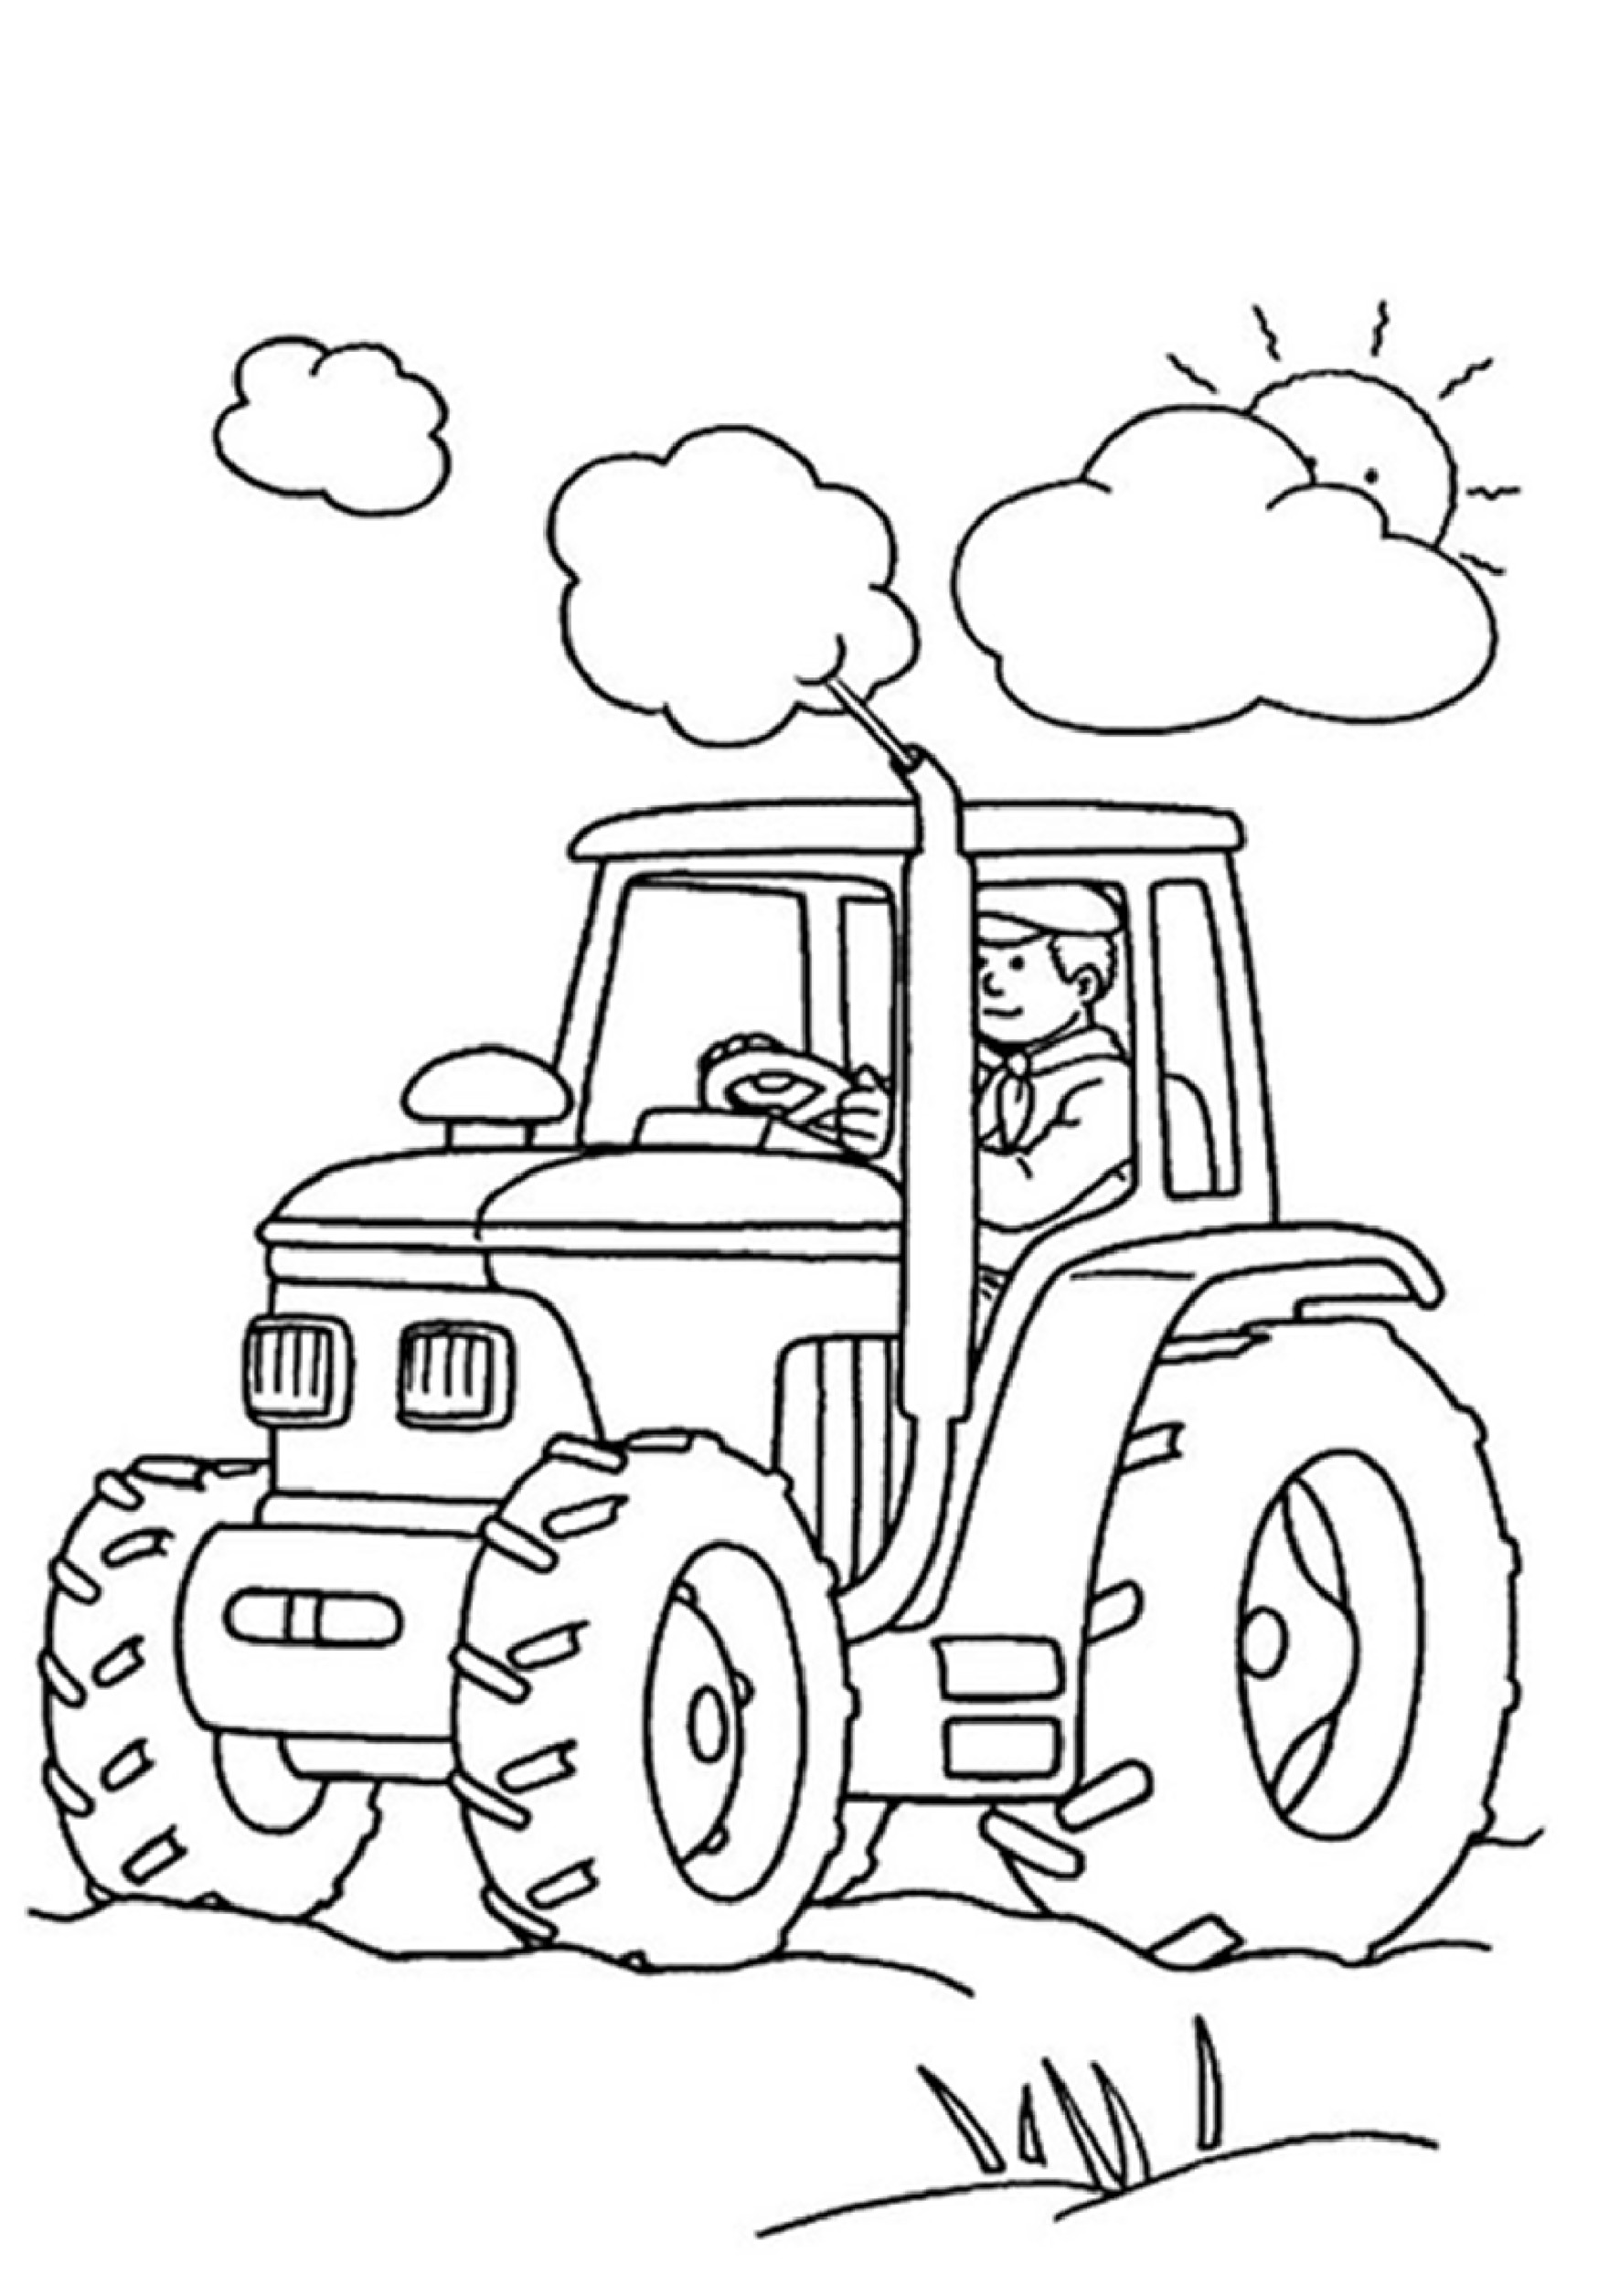 Free Coloring Printable Sheets For Boys
 Coloring pages for boys